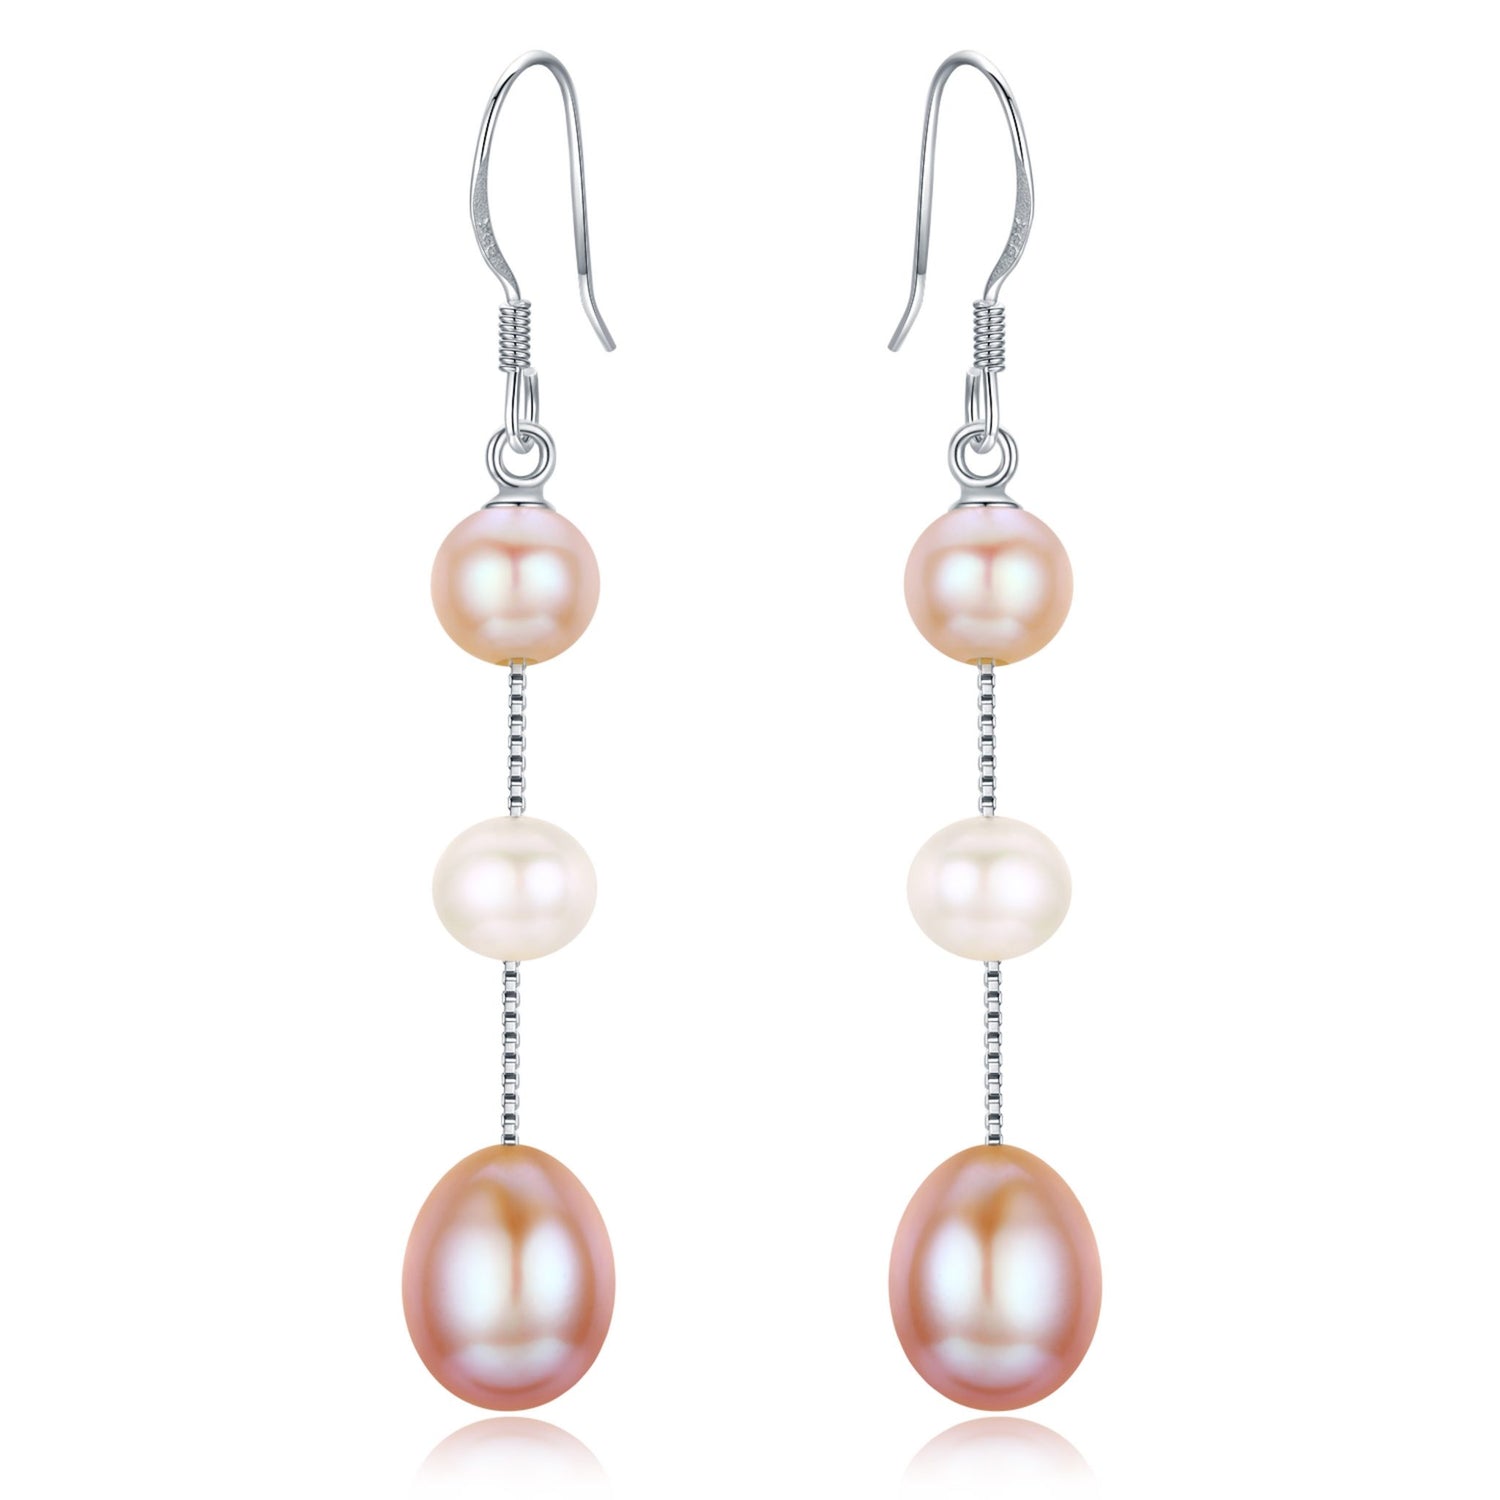 Colorful Drops Earrings - Timeless Pearl